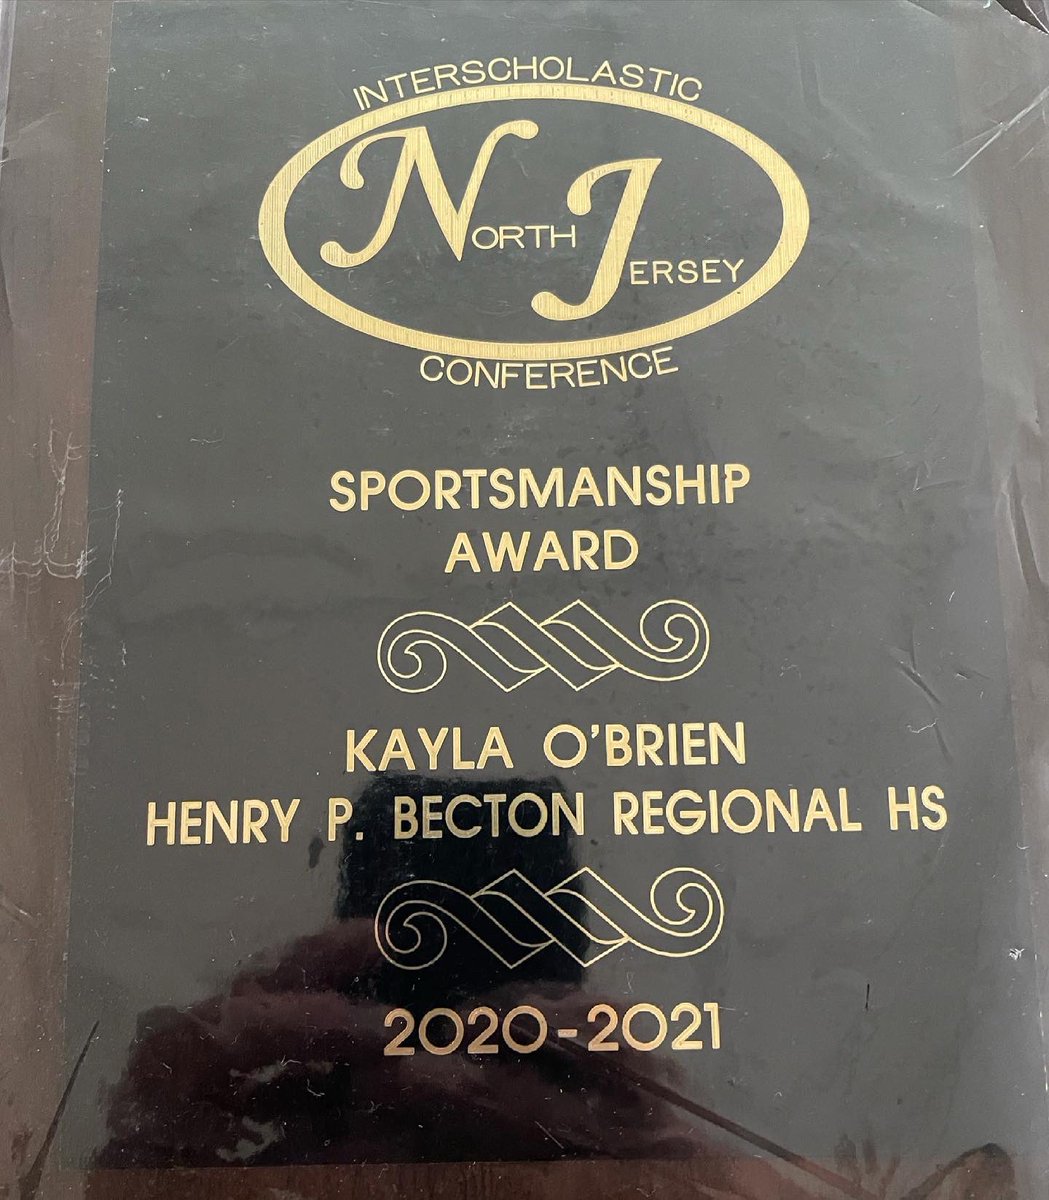 Congratulations to ECA’s own Kayla O’Brienn on committing to the University of Wisconsin Eau Clair to play softball as well as earning the NJIC’s sportsmanship award! Keep putting in all your hard work! 👍💪